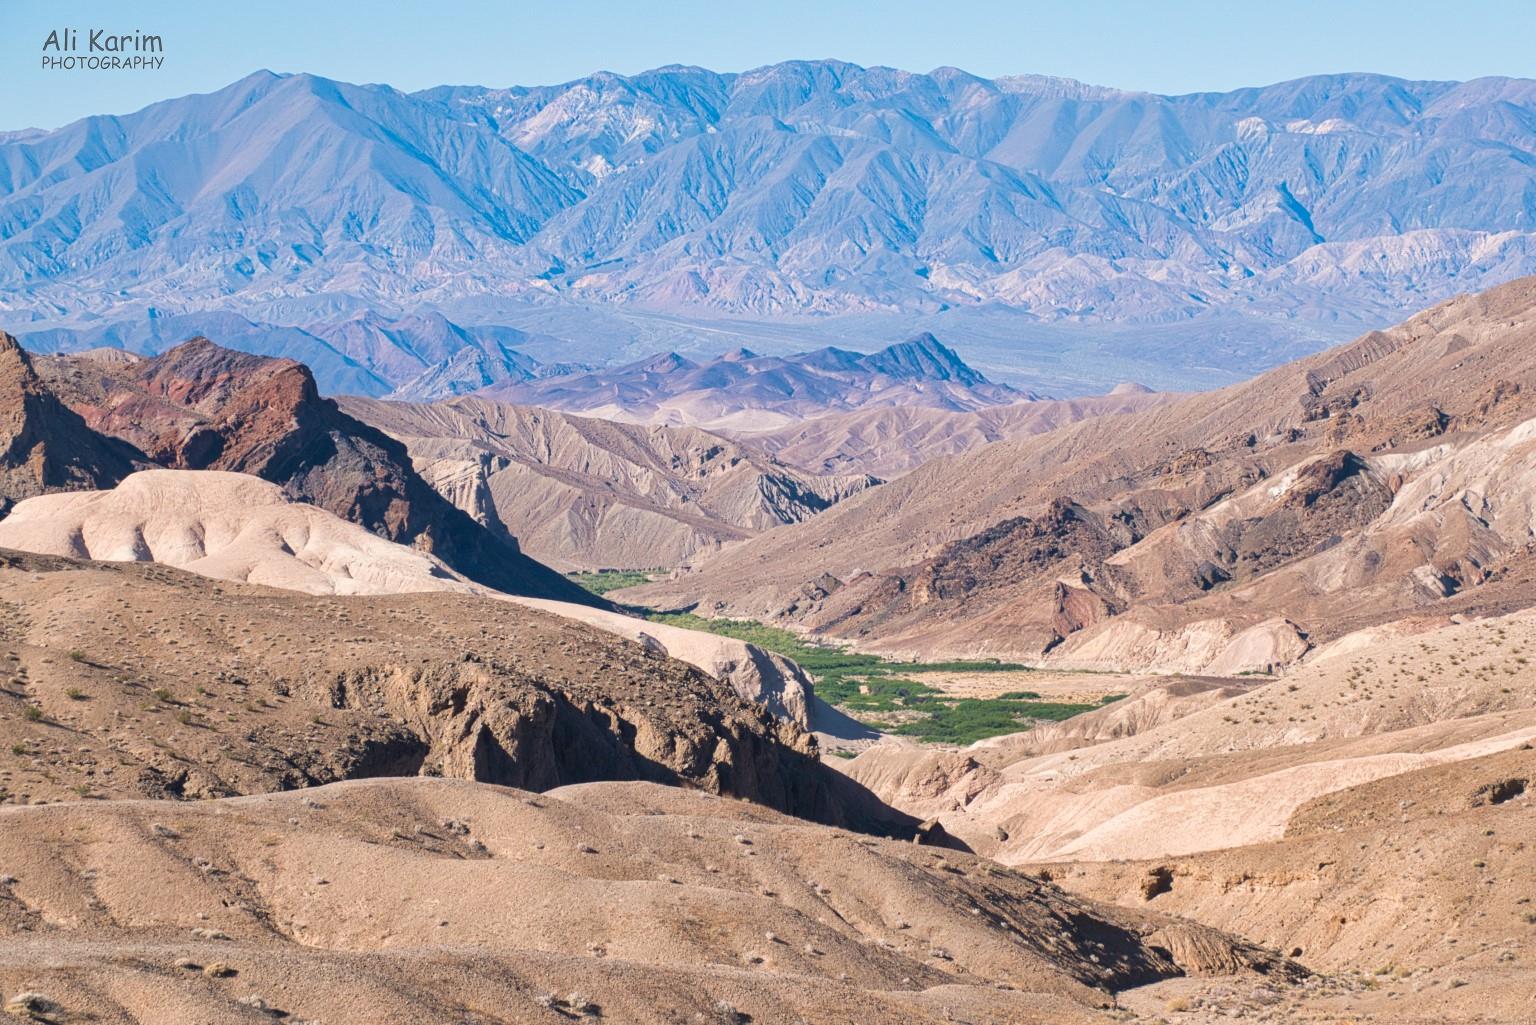 Death Valley National Park, June 2020, Desert Landscape with oasis green vegetation and the China Ranch in the desert valley (center of image) thanks to a natural spring